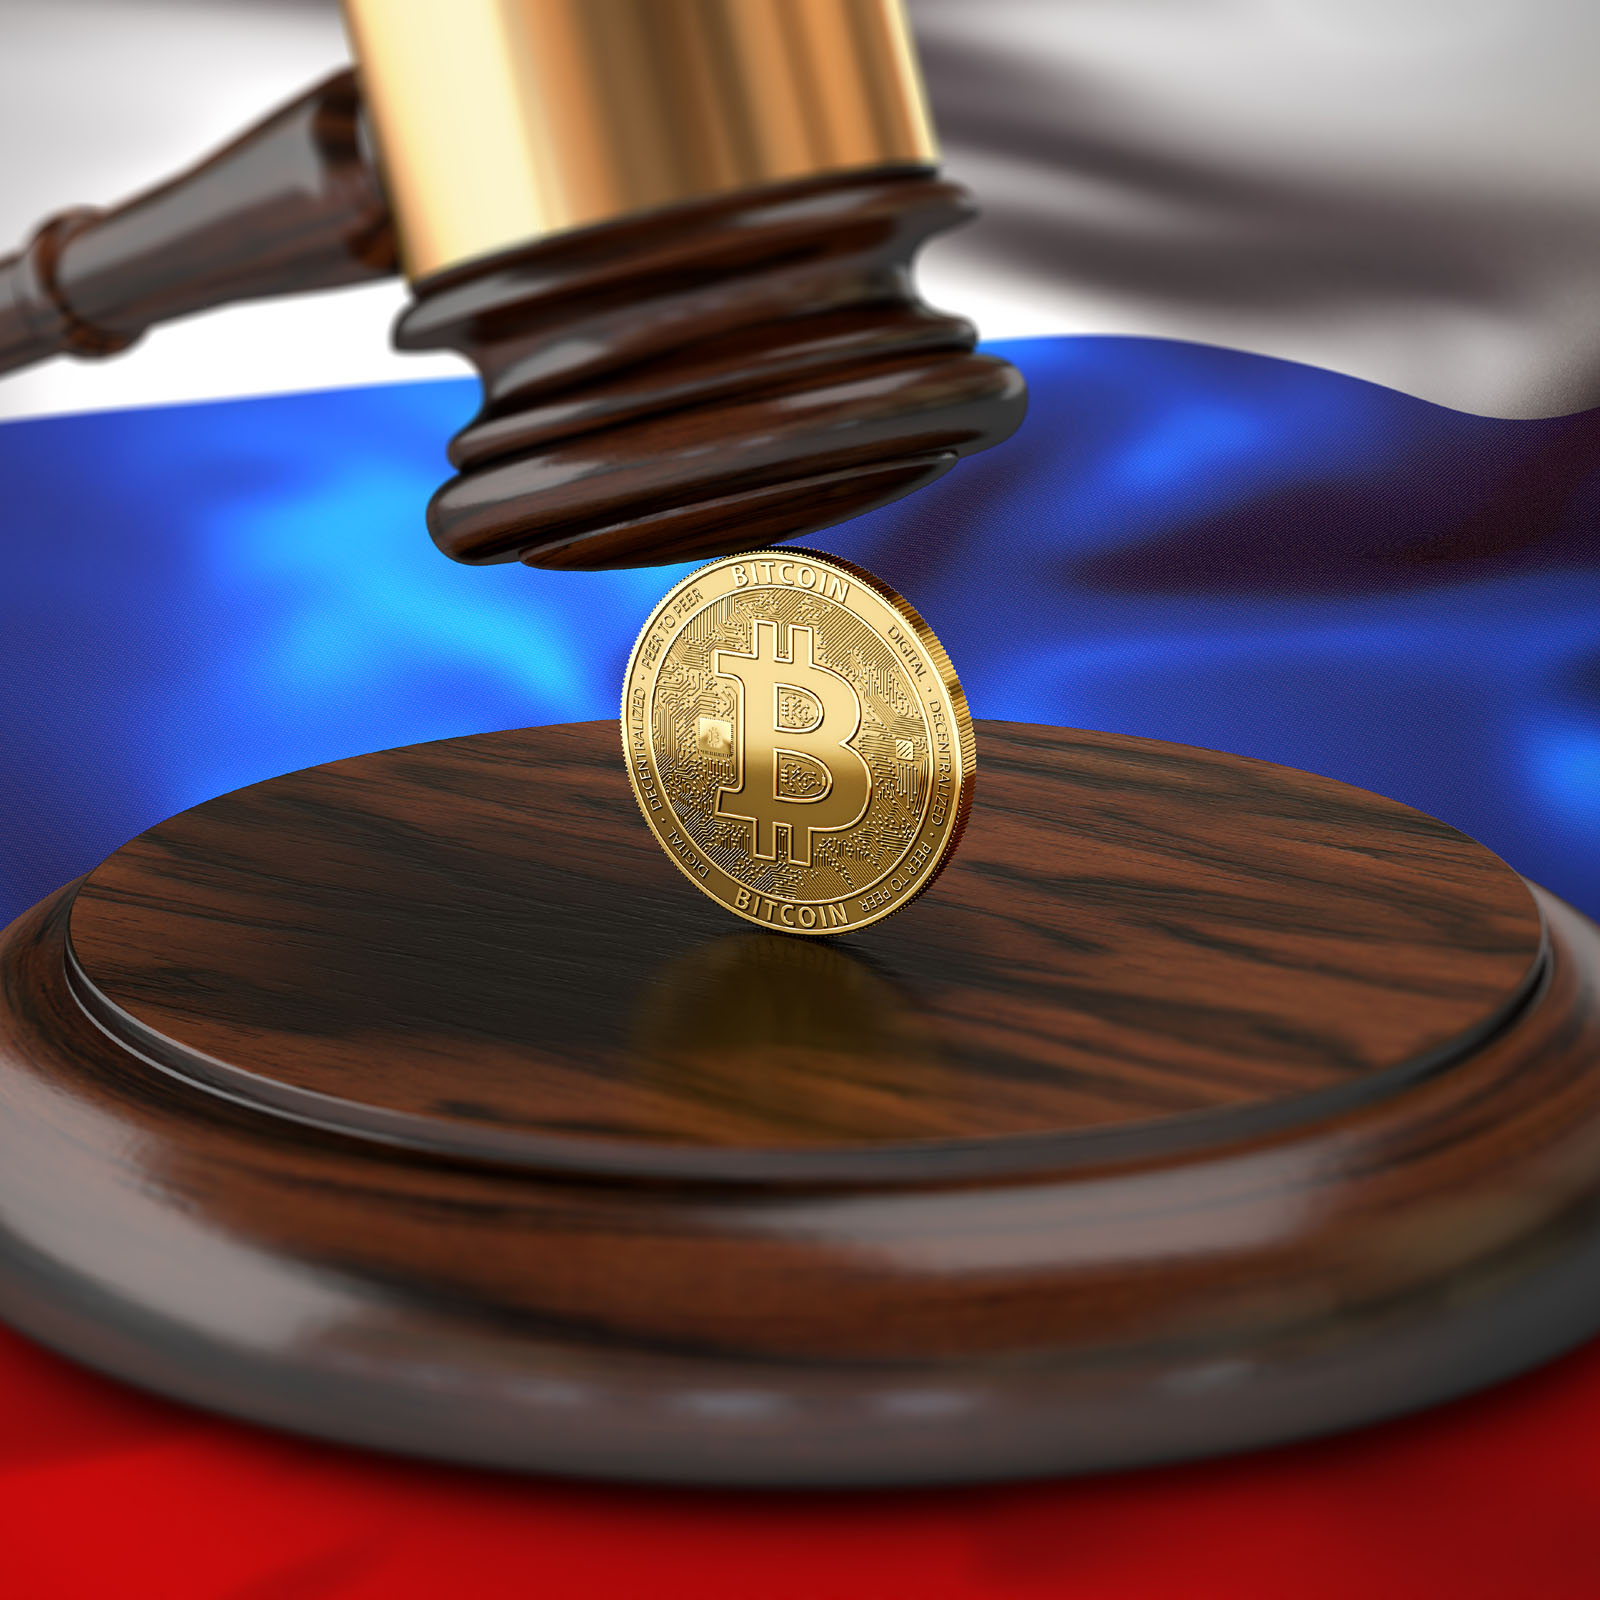 Russia | Russian Court | Cryptocurrency | Cryptocurrency equals property | Cryptocurrency updates